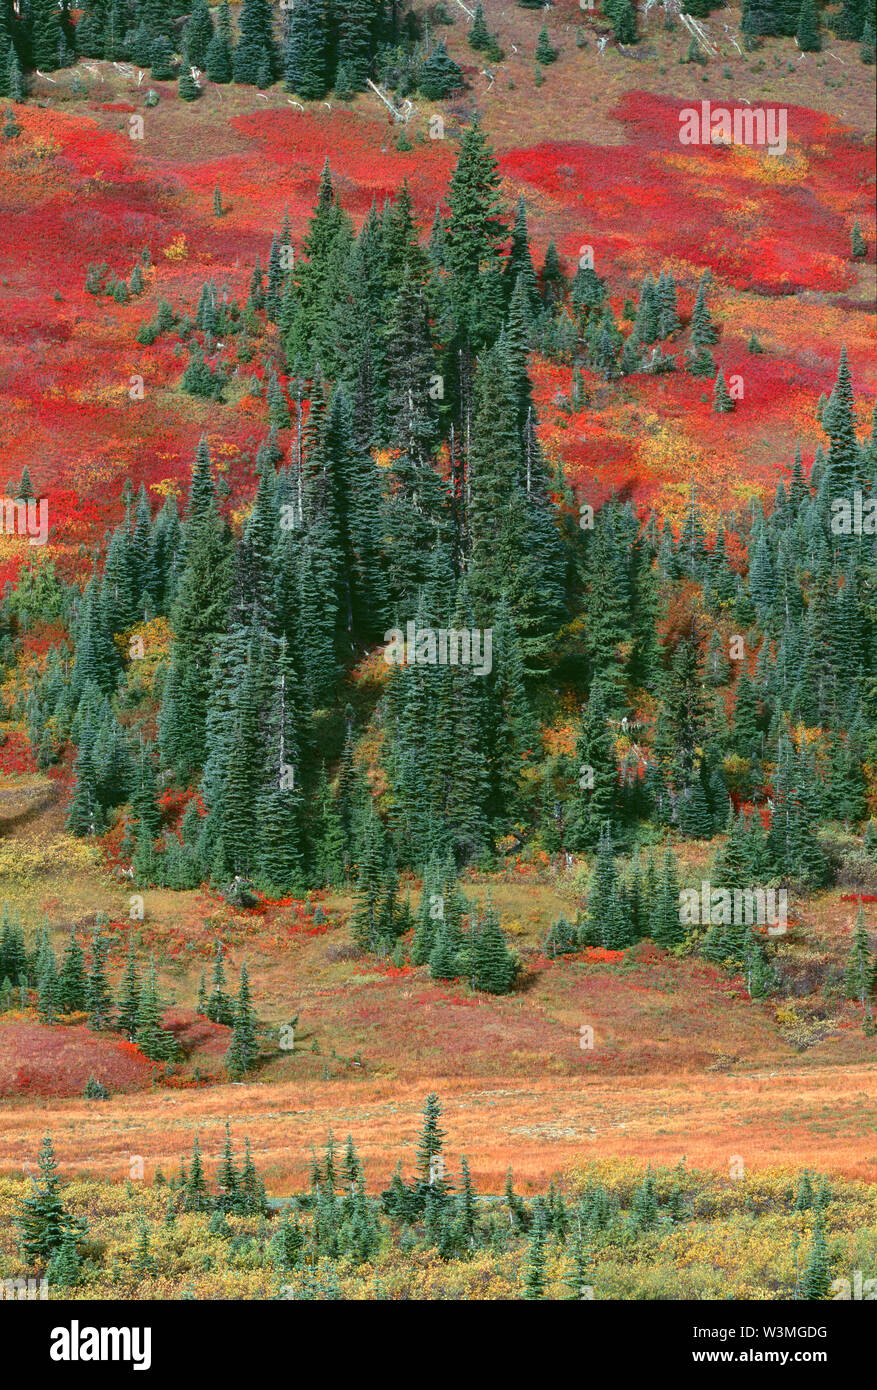 USA, Washington, Mt. Rainier National Park, Shrubs; primarily huckleberry, blueberry and mountain ash, display fall color among scattered conifers. Stock Photo